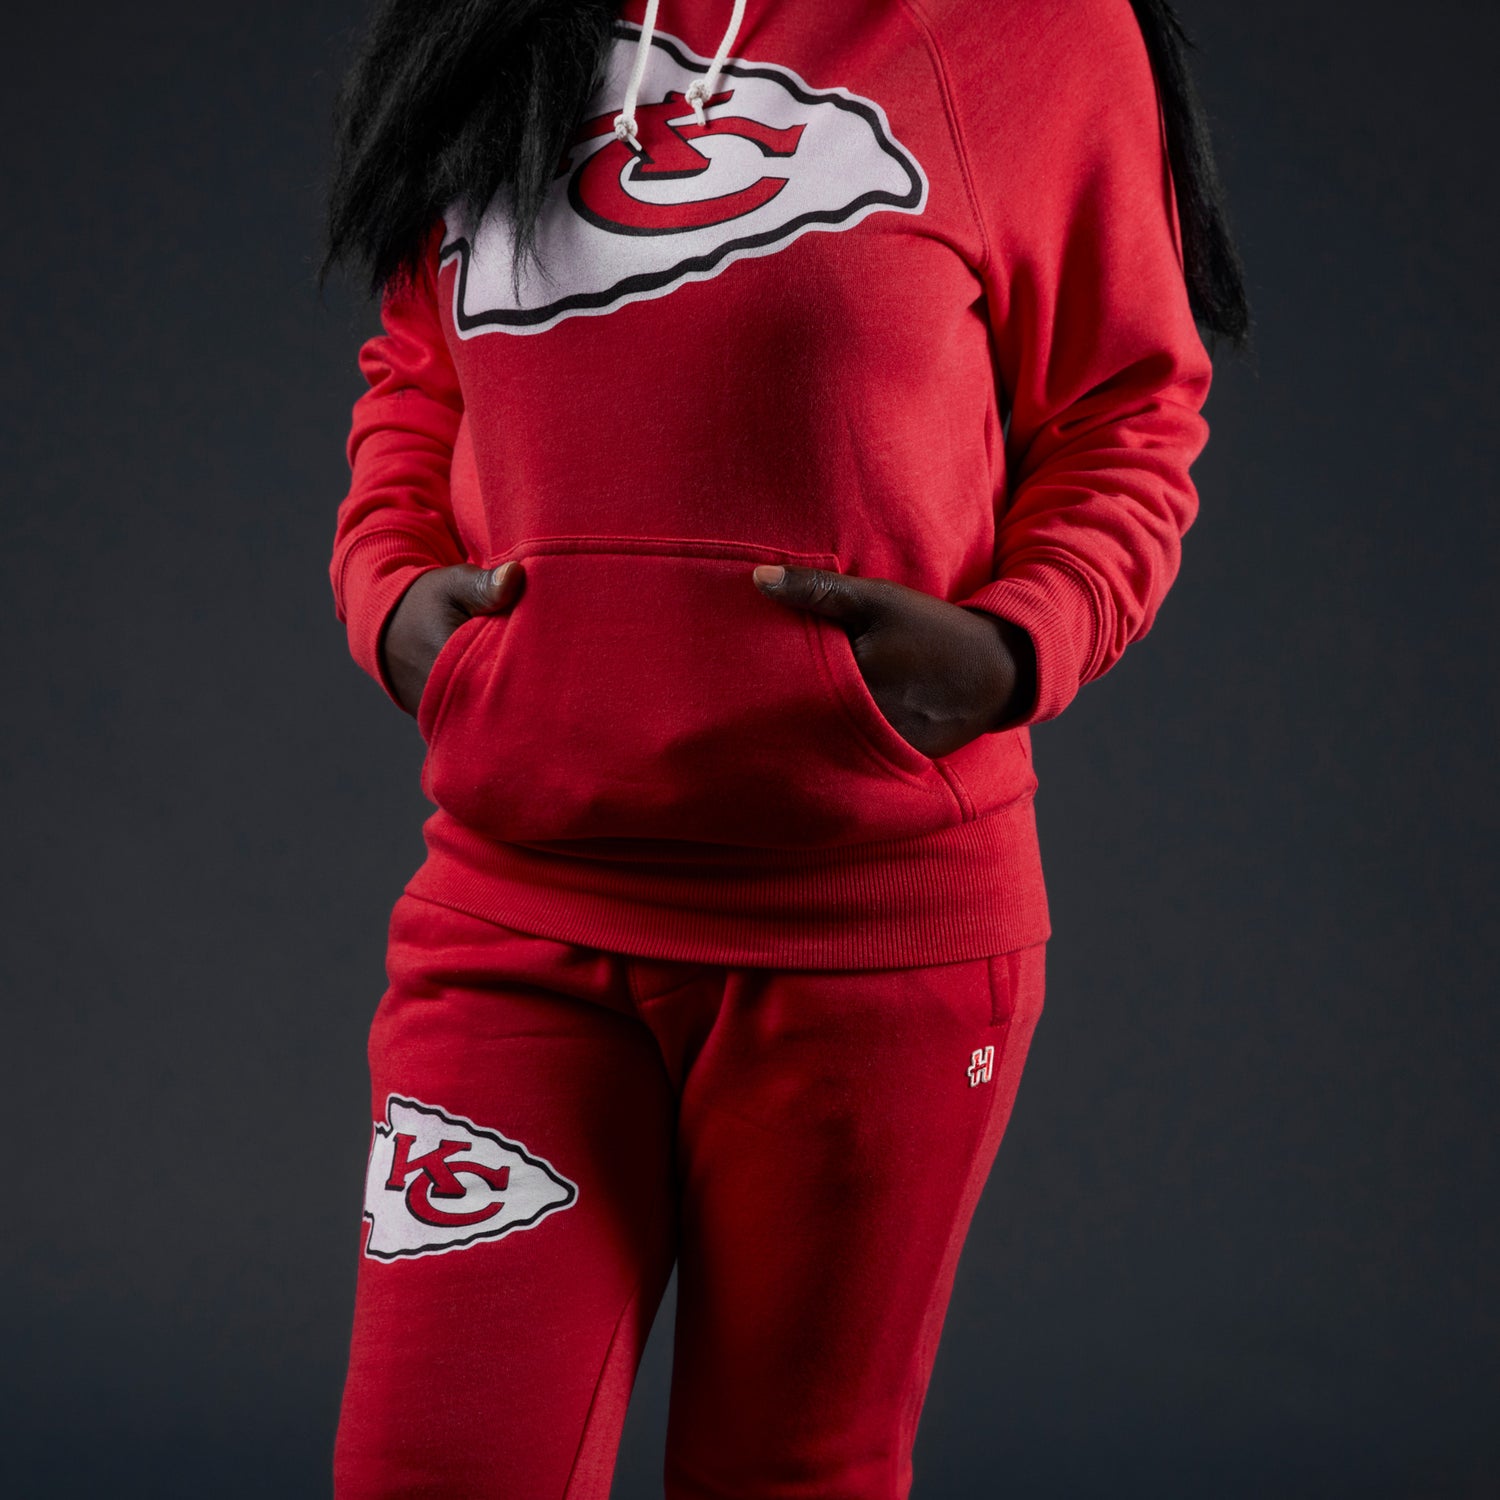 Kansas City Chiefs '72 Hoodie from Homage. | Officially Licensed Vintage NFL Apparel from Homage Pro Shop.